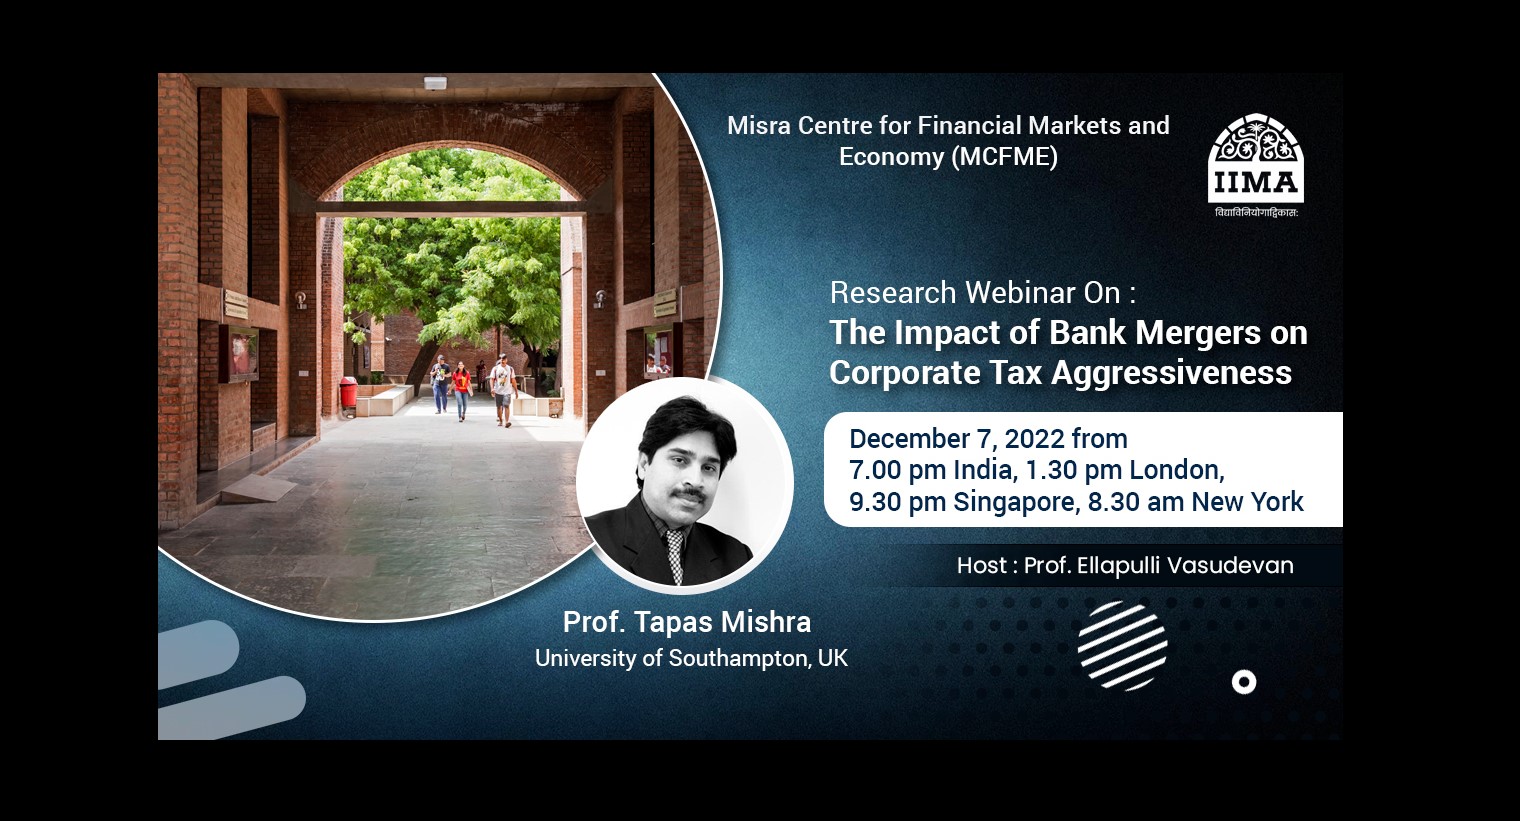 Research Webinar On: The Impact of Bank Mergers on Corporate Tax Aggressiveness